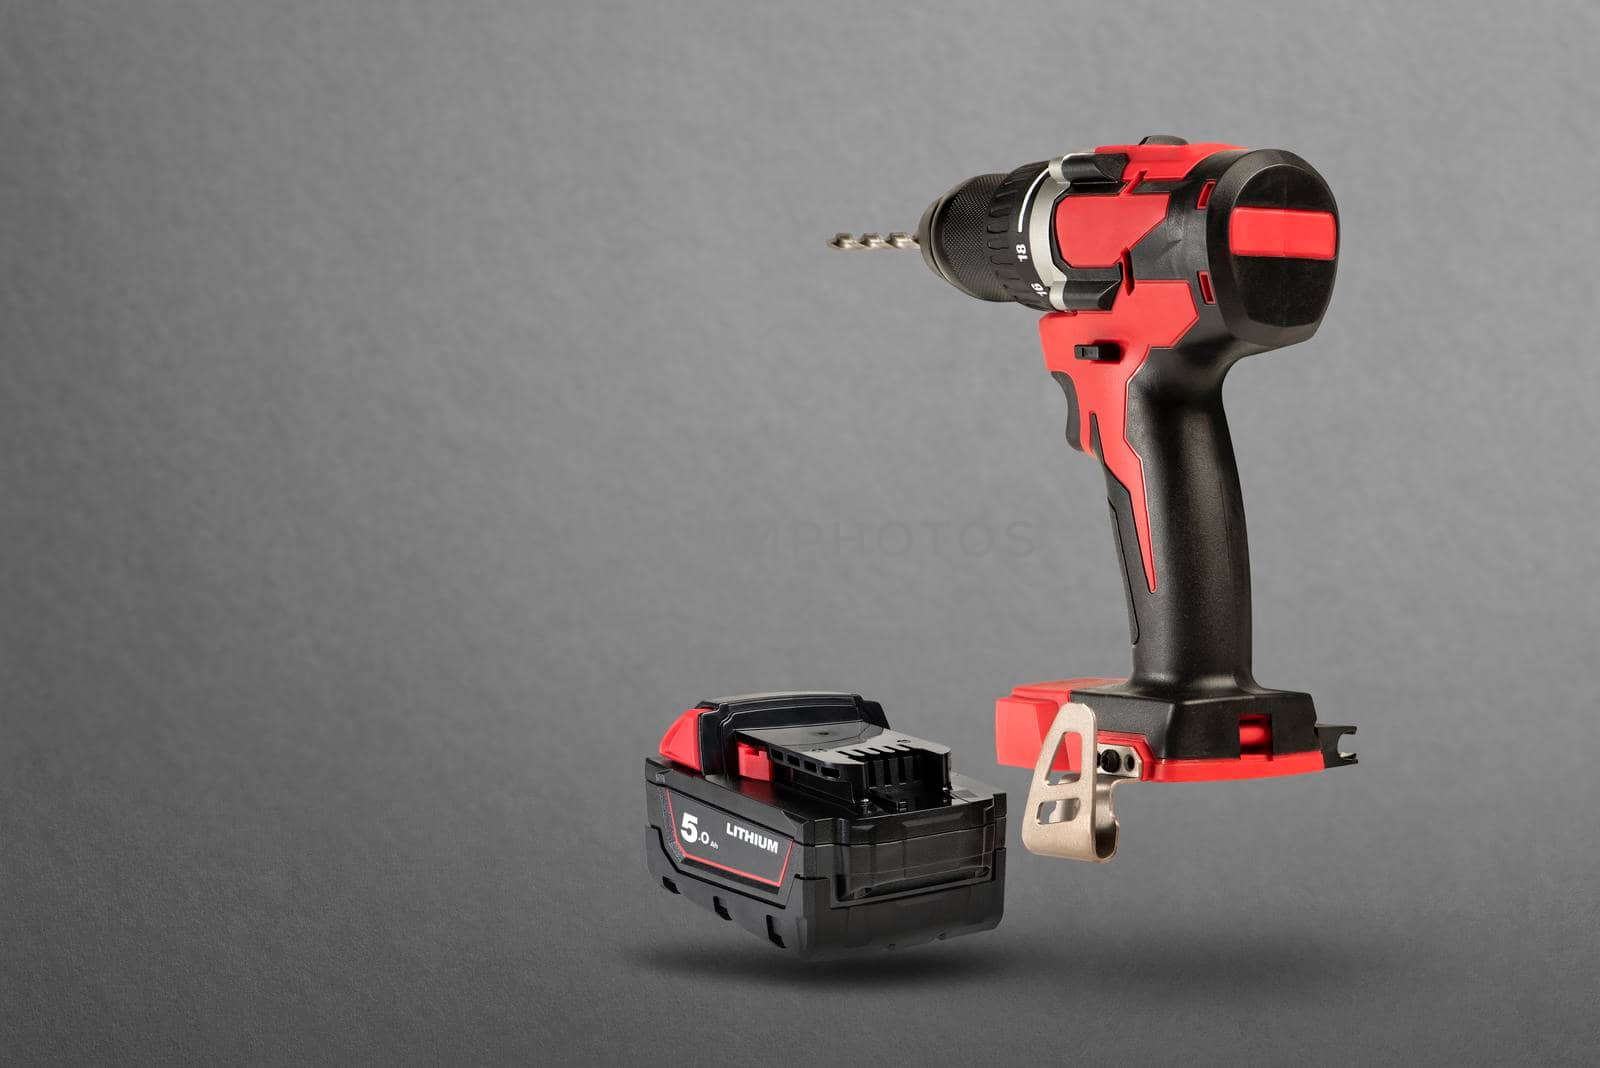 Wireless tools. Cordless drill with drill bit. The screwdriver with the battery removed falls, casting a shadow. Advertising banner of construction or industrial theme on gray background.